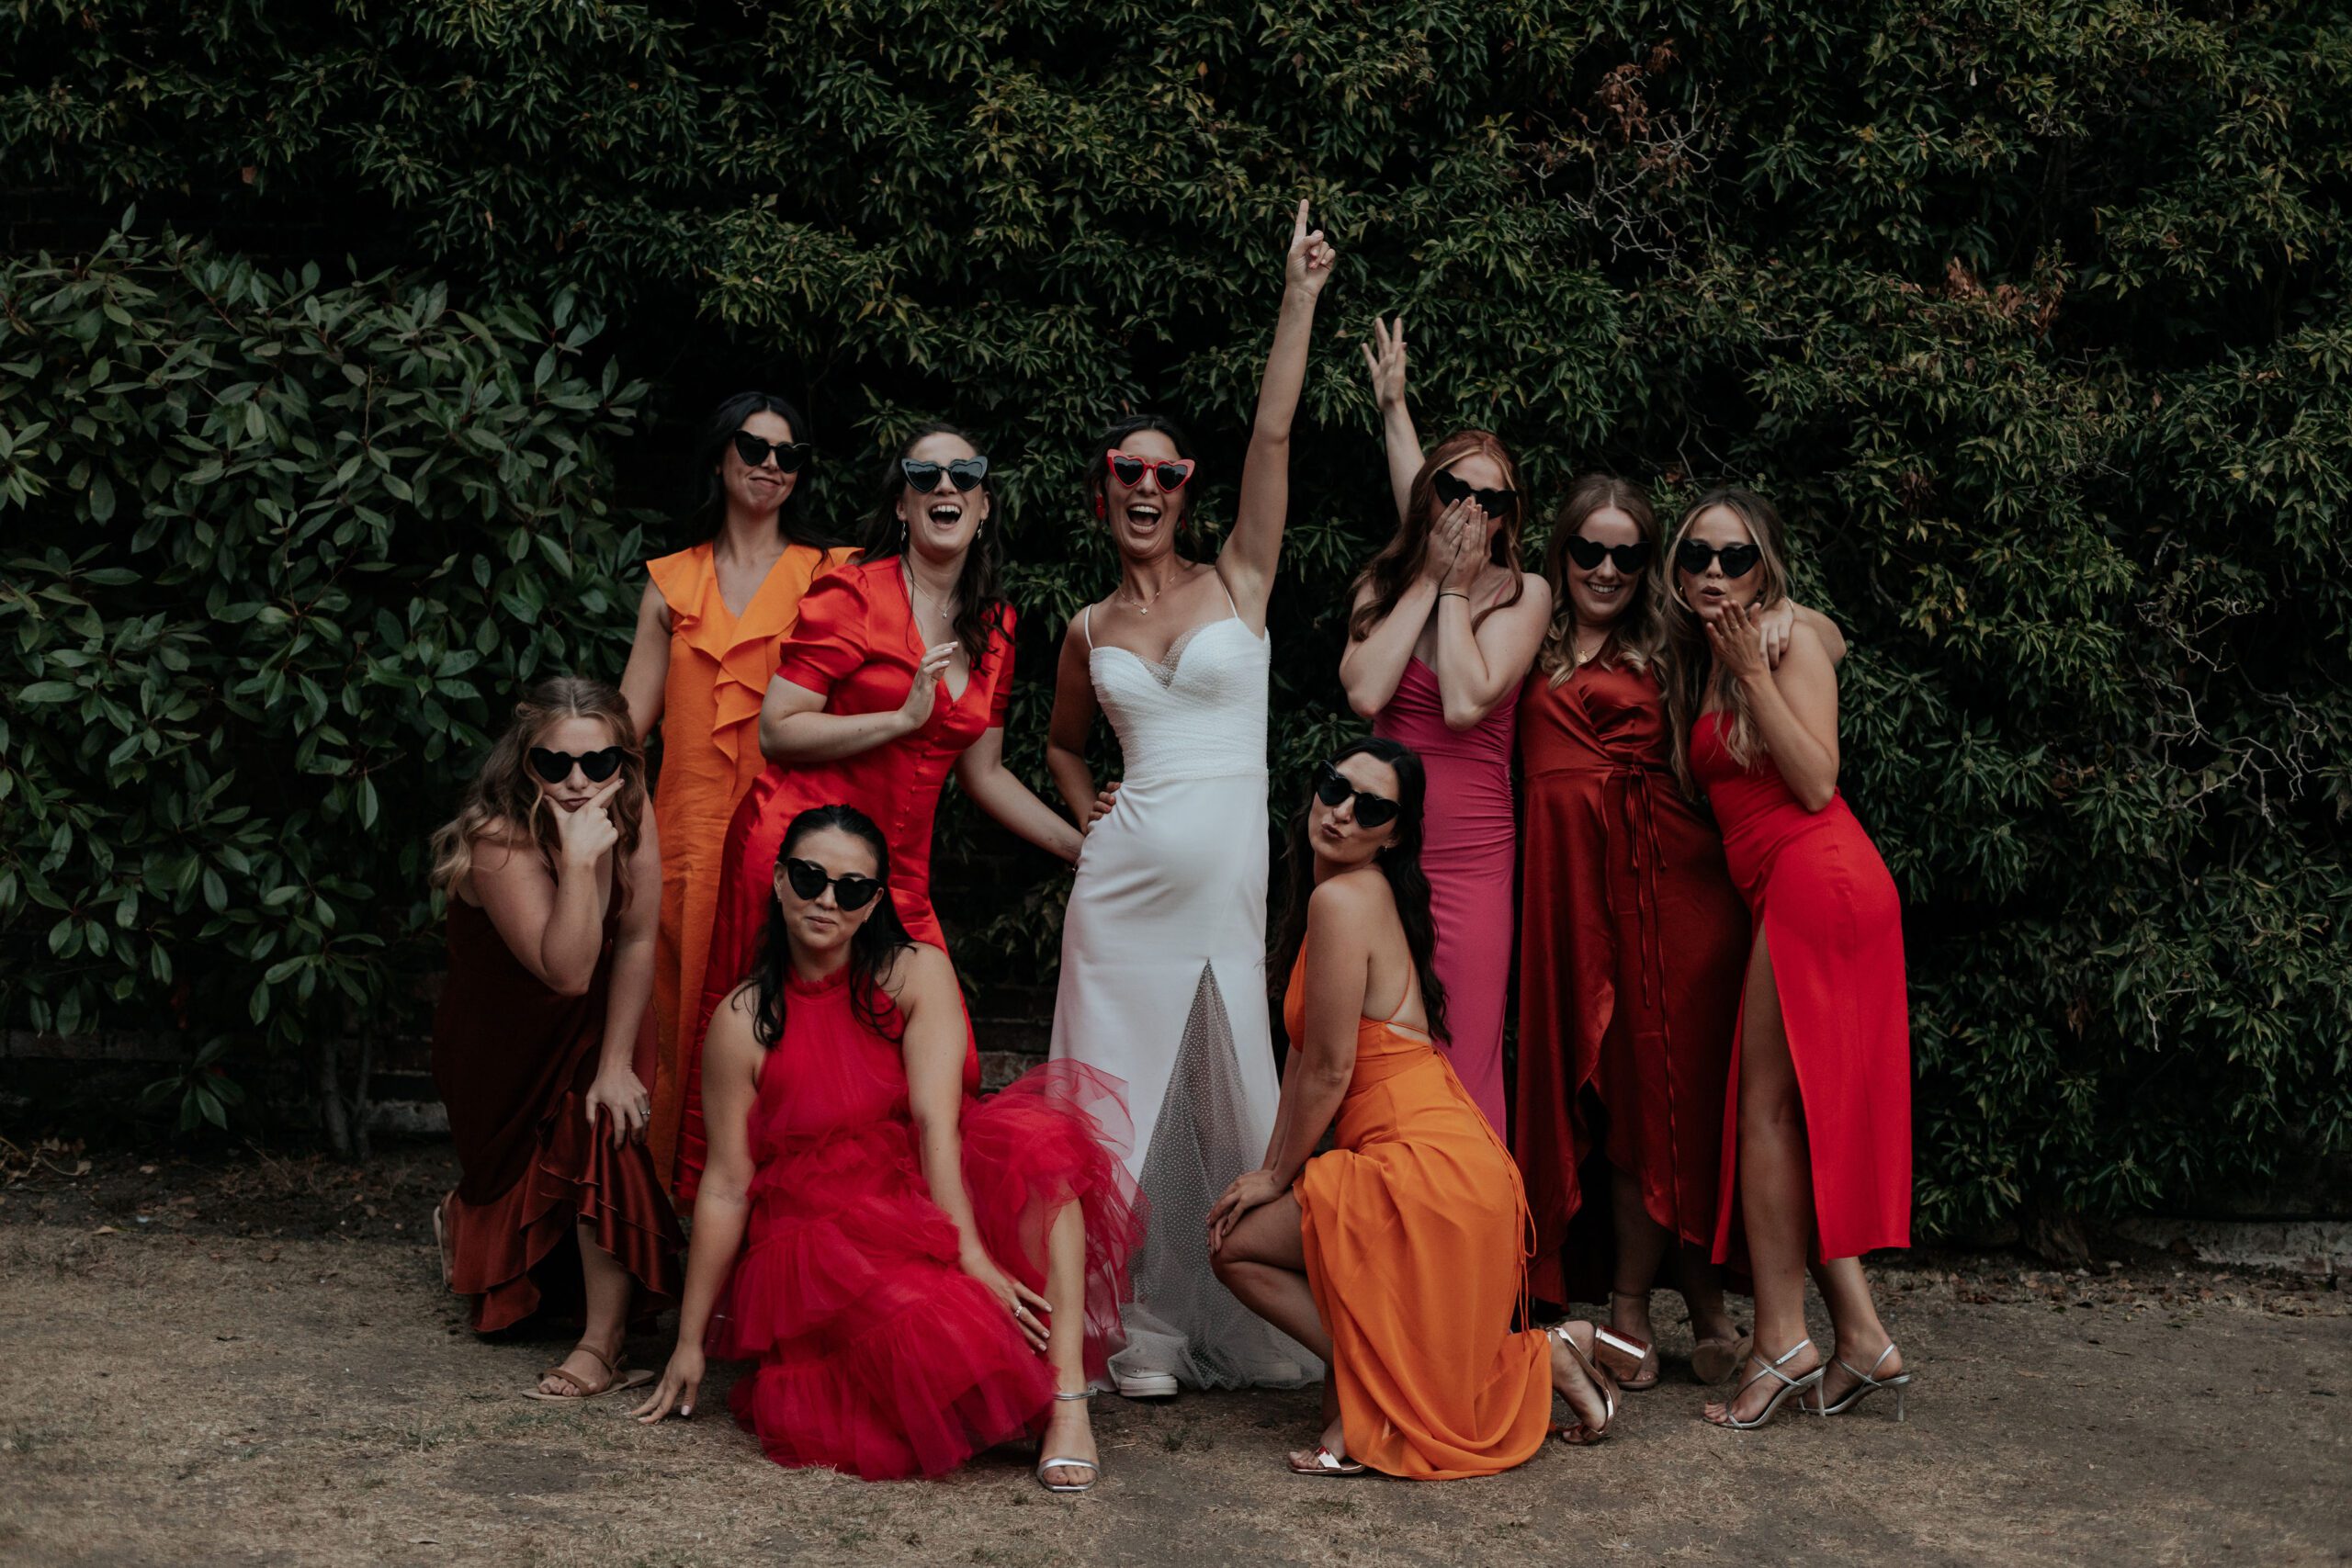 Bride and bridesmaids strike a pose wearing heart shaped sunglasses and mismatched bridesmaid dresses